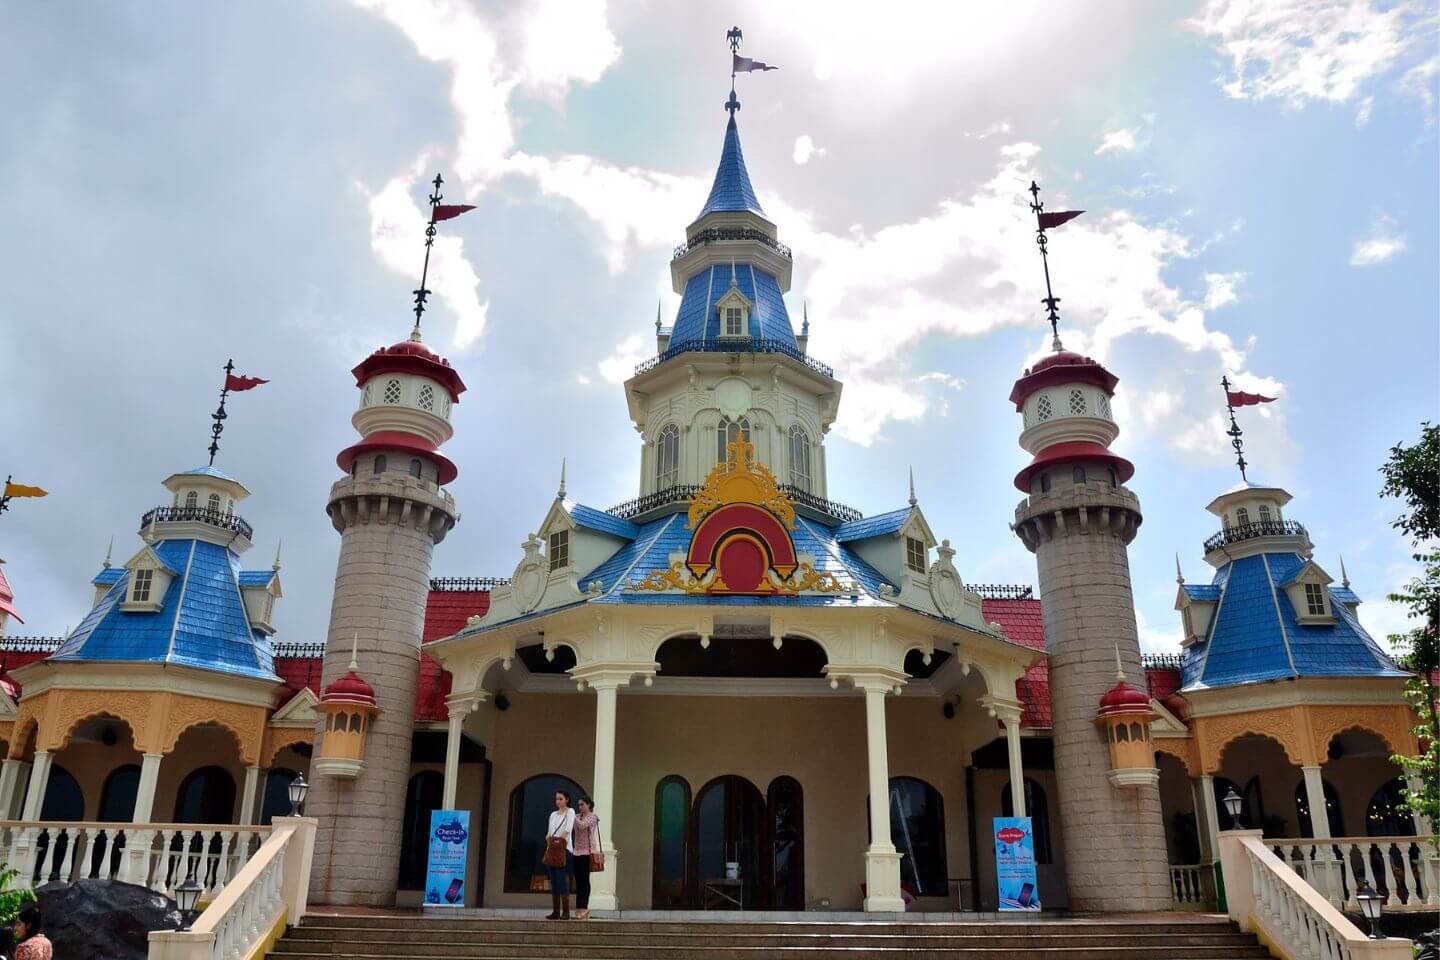 Imagica Adlabs, Amusement and Theme Parks in Pune